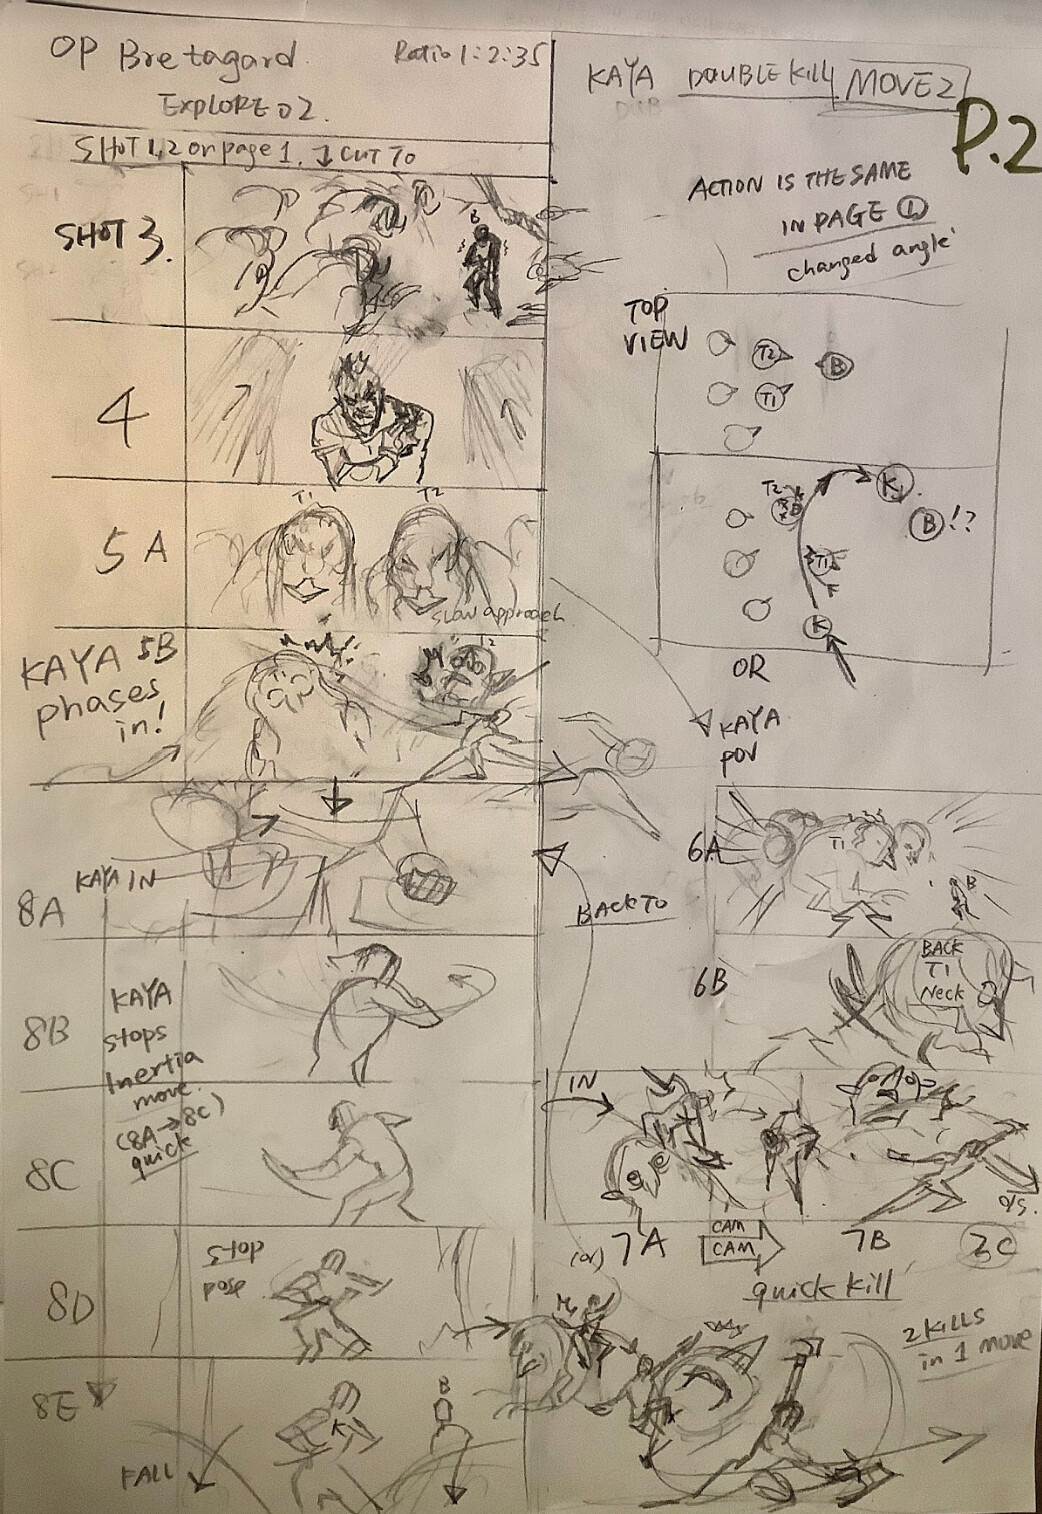 pre-production storyboards - shot plan